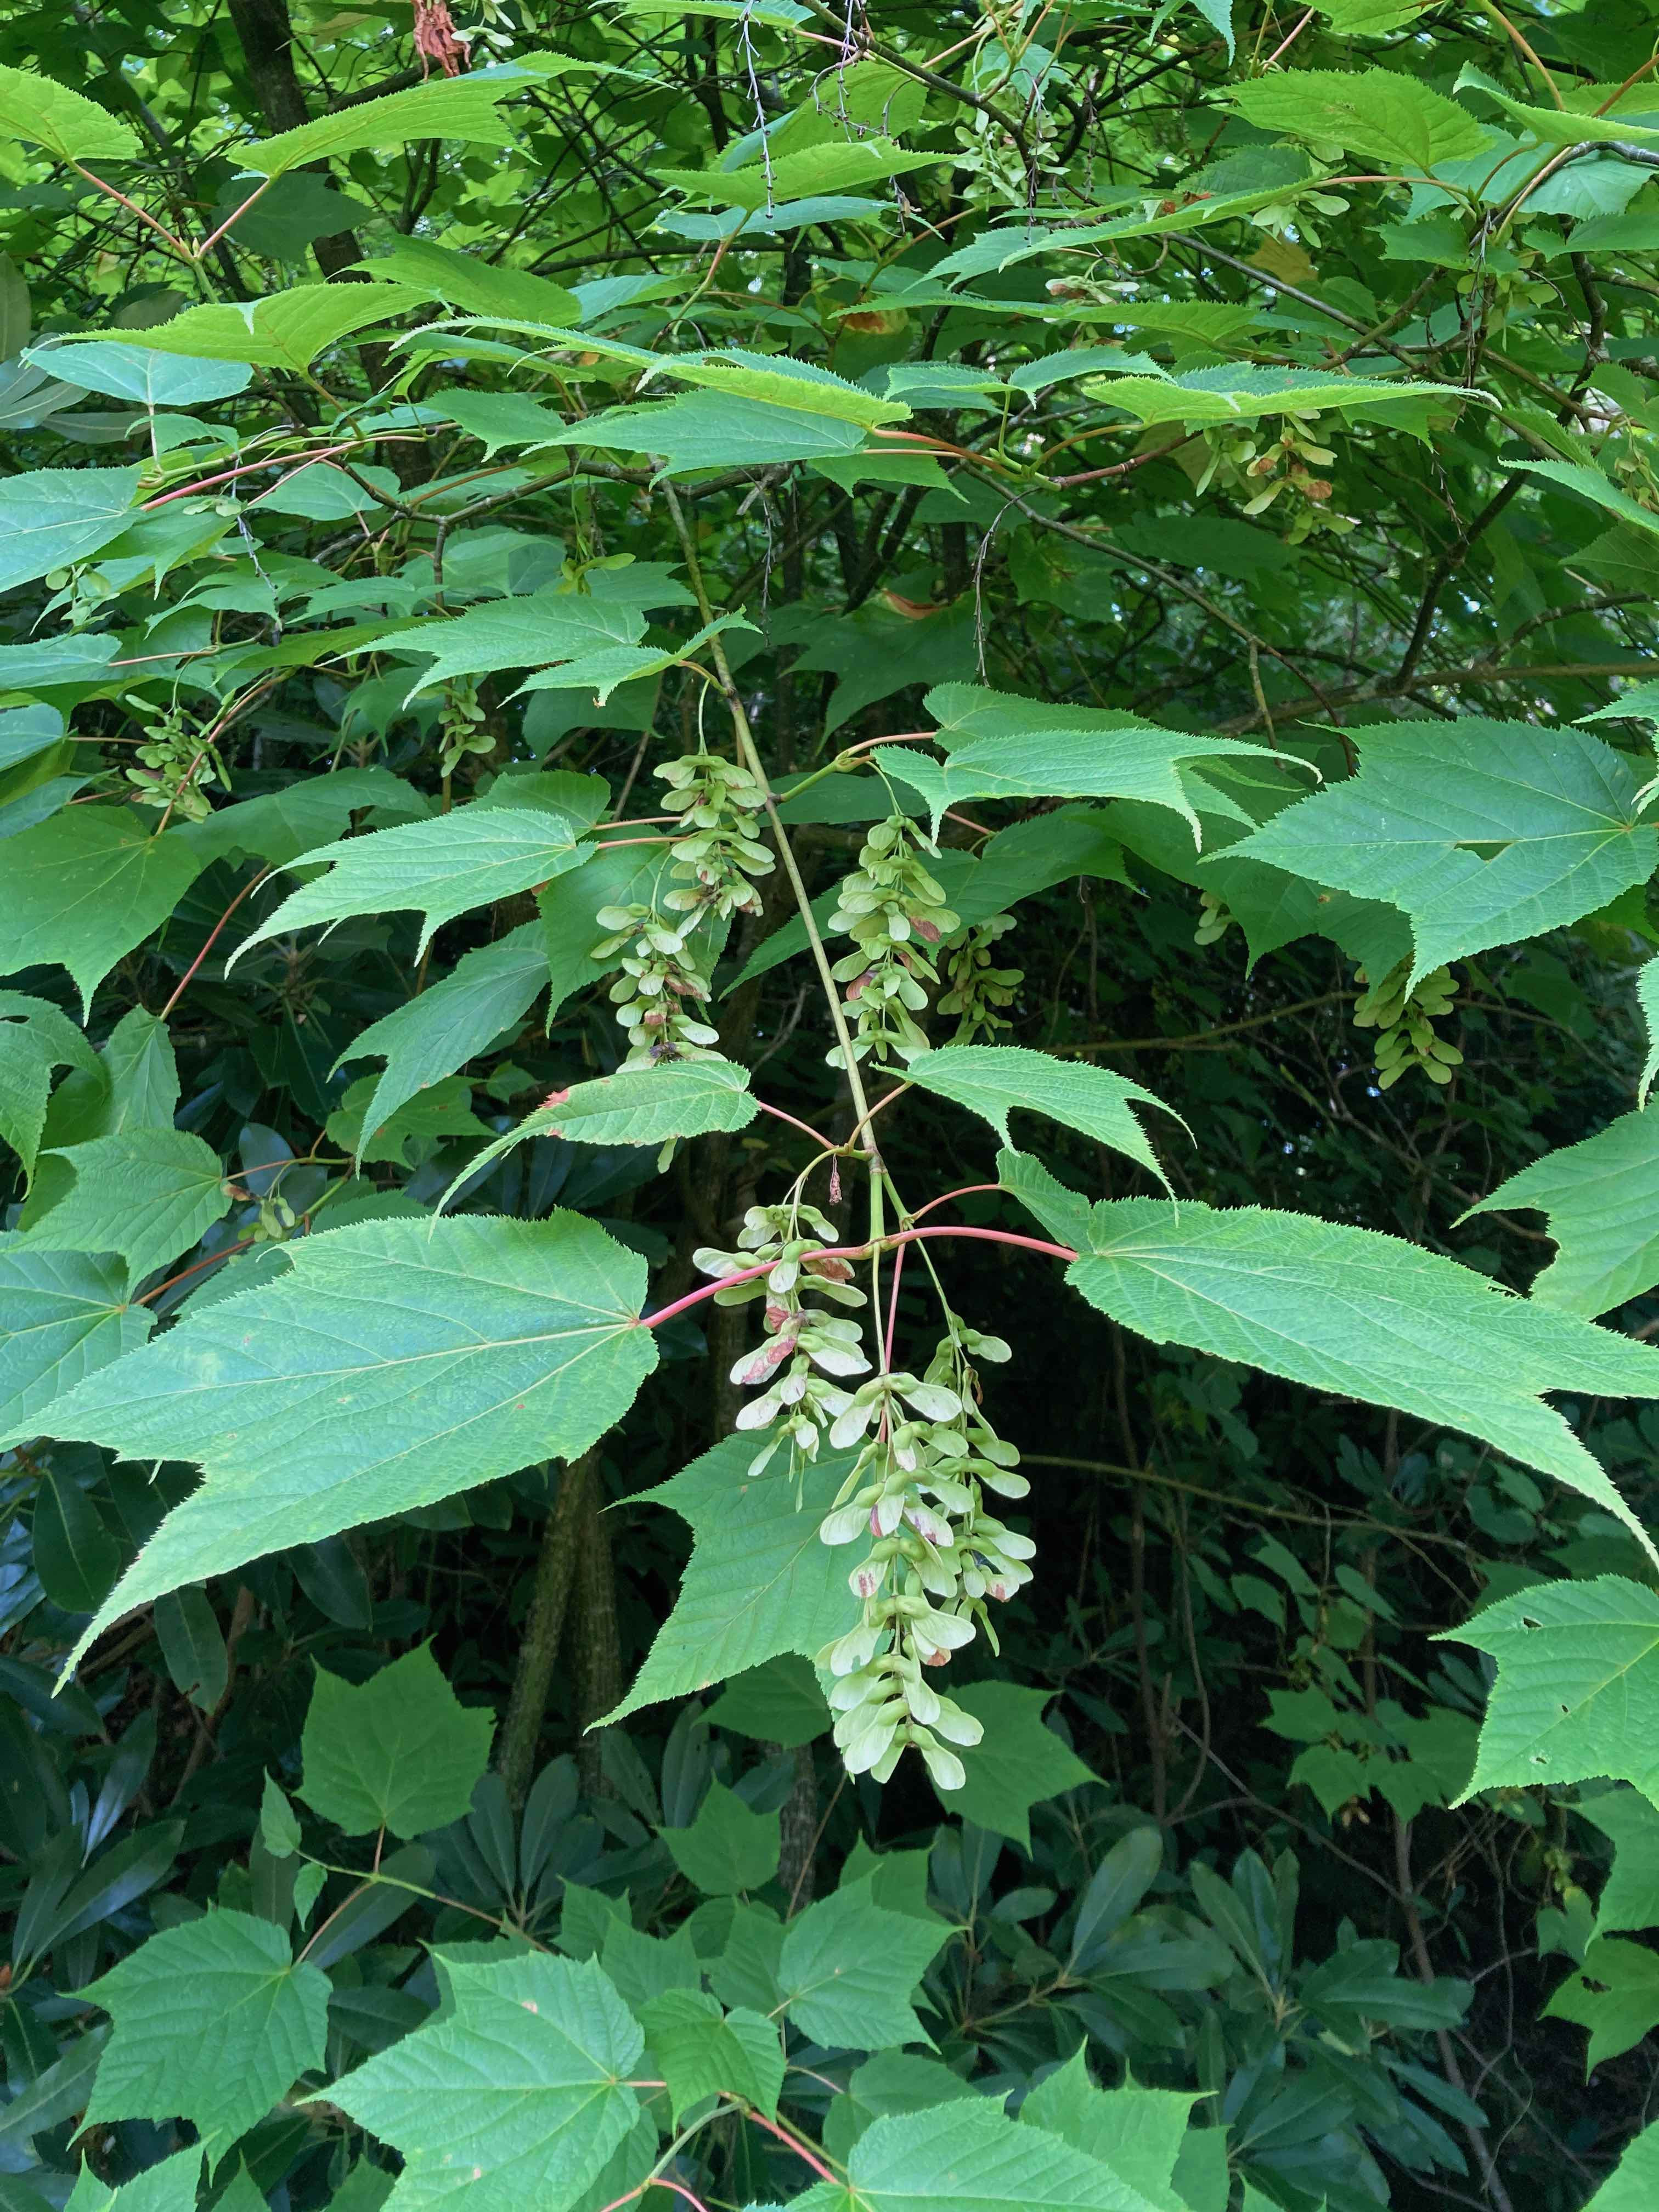 The Scientific Name is Acer pensylvanicum. You will likely hear them called Striped Maple, Moosewood, Whistlewood, Goosefoot Maple. This picture shows the The flowers and fruit (samaras) are in long, dangling clusters several inches long. of Acer pensylvanicum